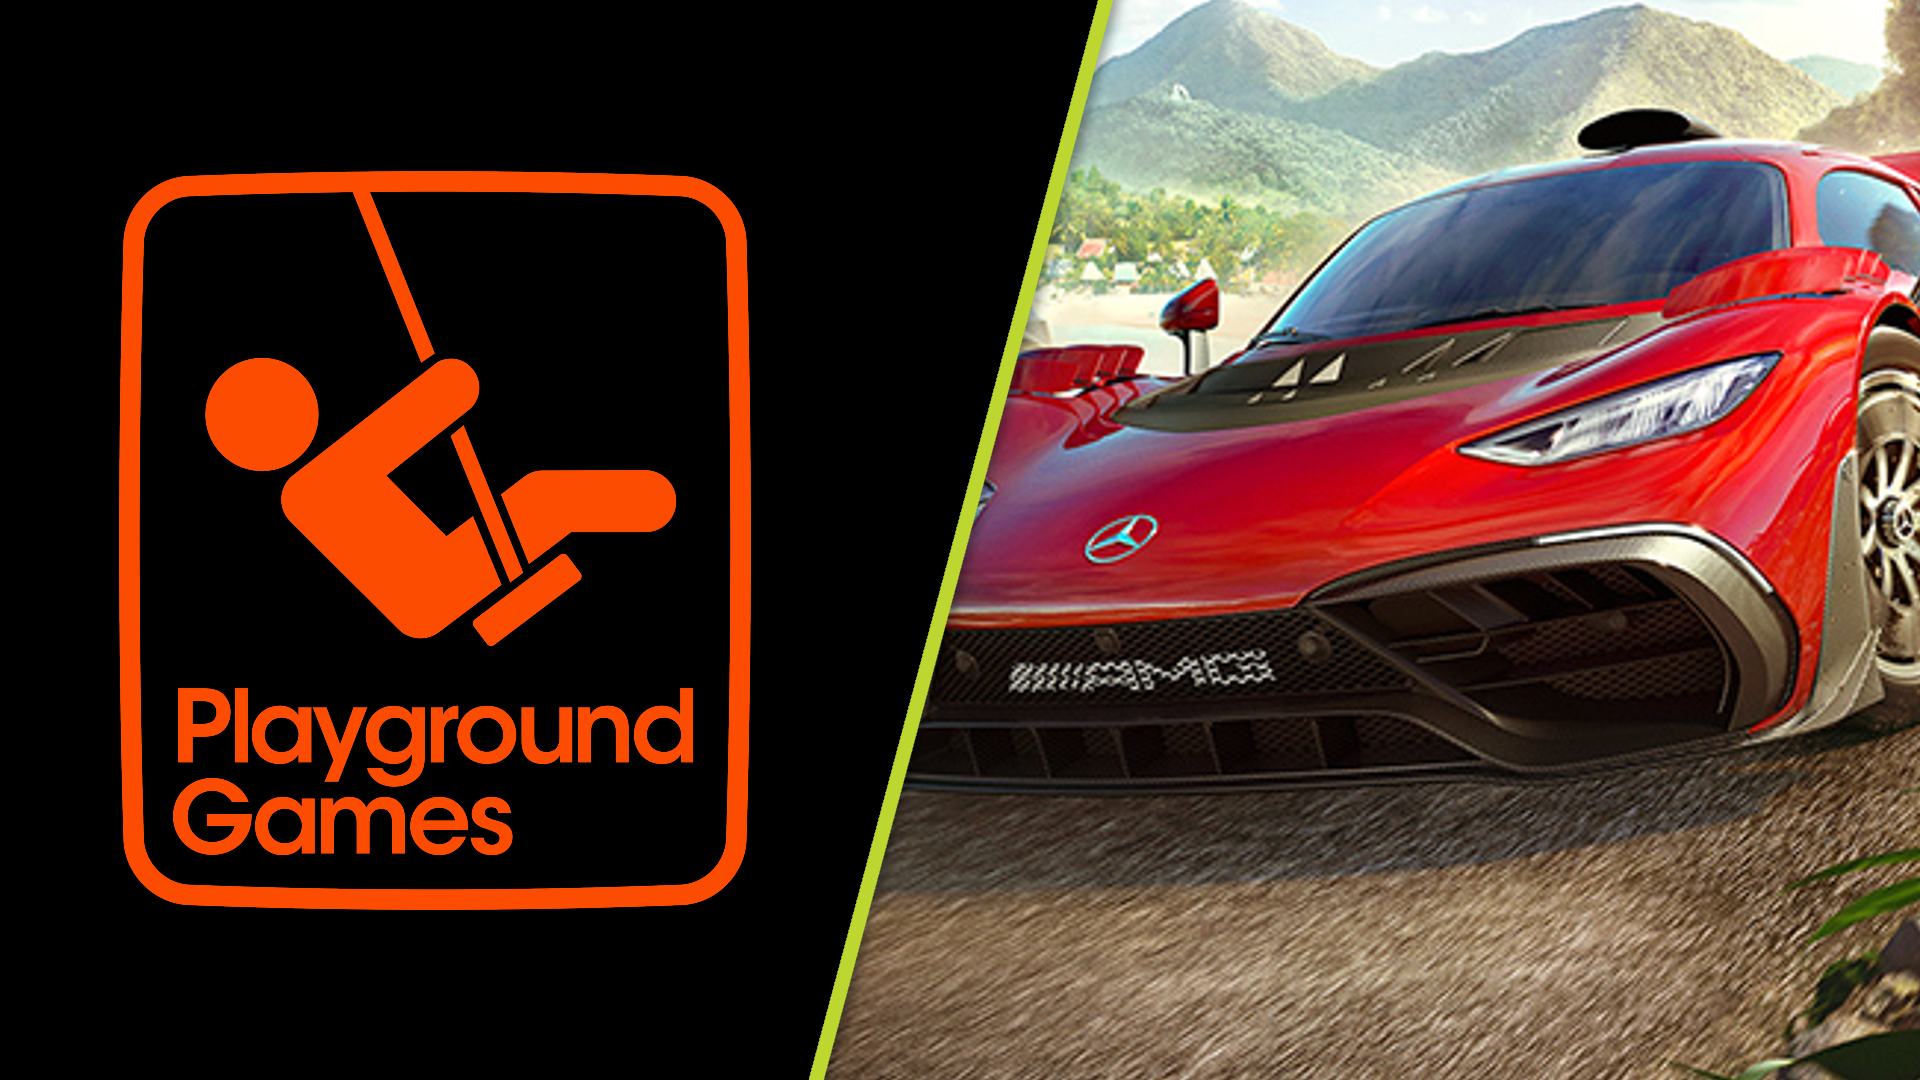 Forza Horizon 6 Release Date for PC & Xbox, New Map & location: When is it  coming out? - DigiStatement